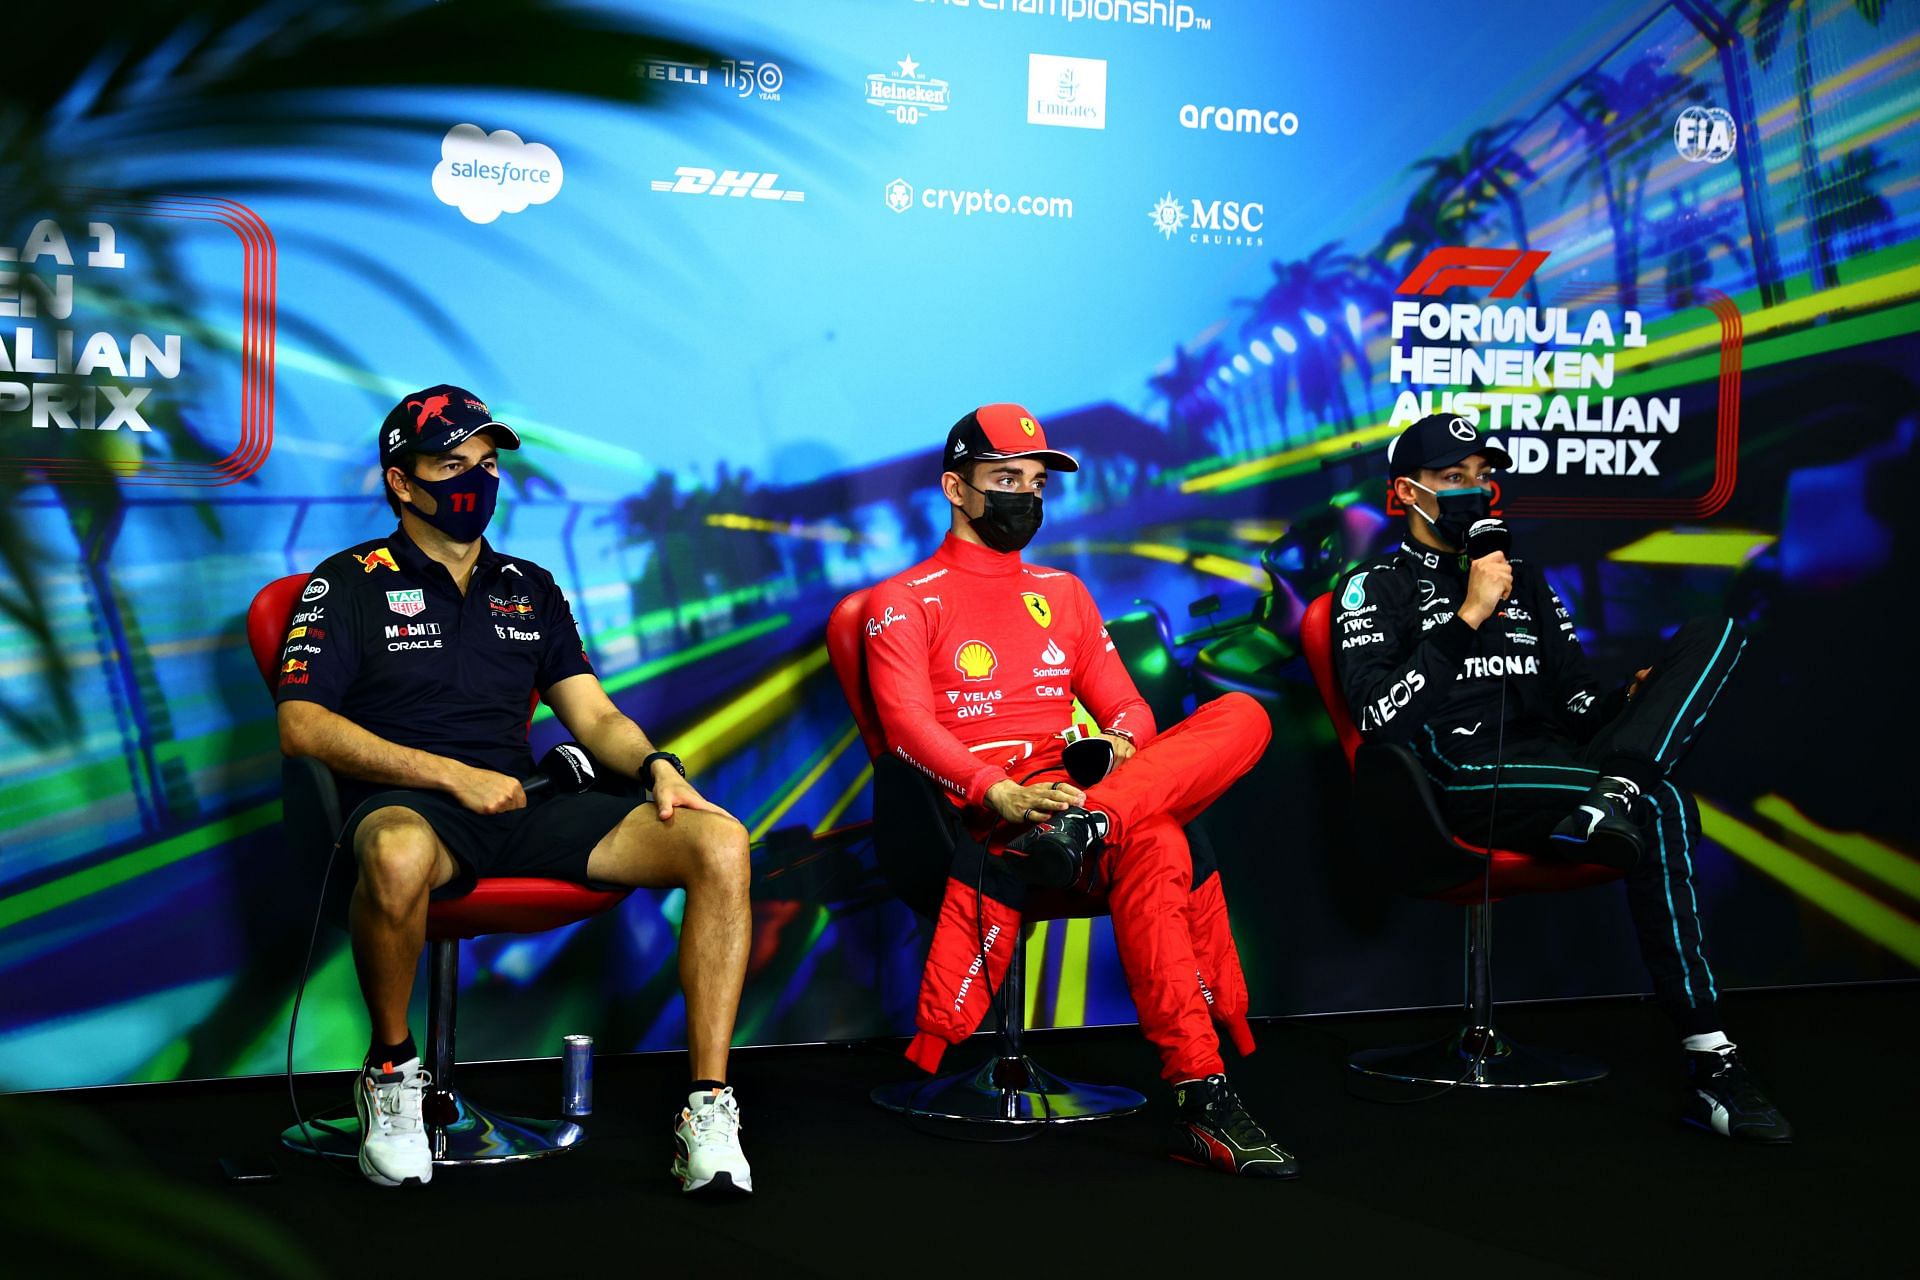 F1 Grand Prix of Australia - (L to R) Charles Leclerc, Sergio Perez, and George Russell during a press conference